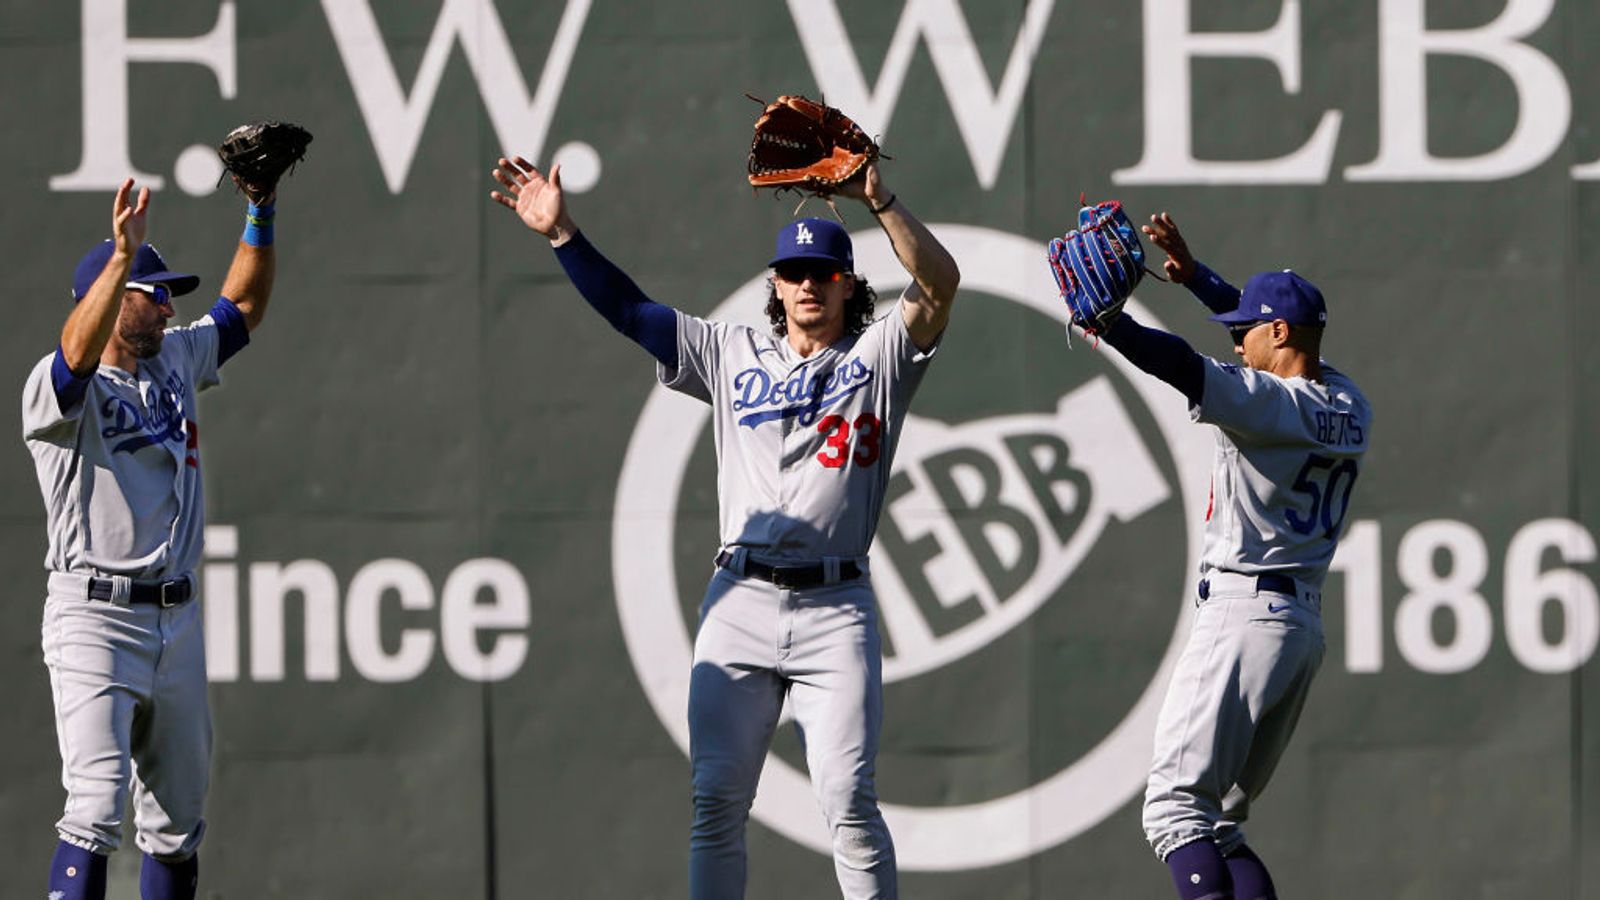 BSJ Game Report: Dodgers 7, Red Sox 4 - Offense stalls as Mookie